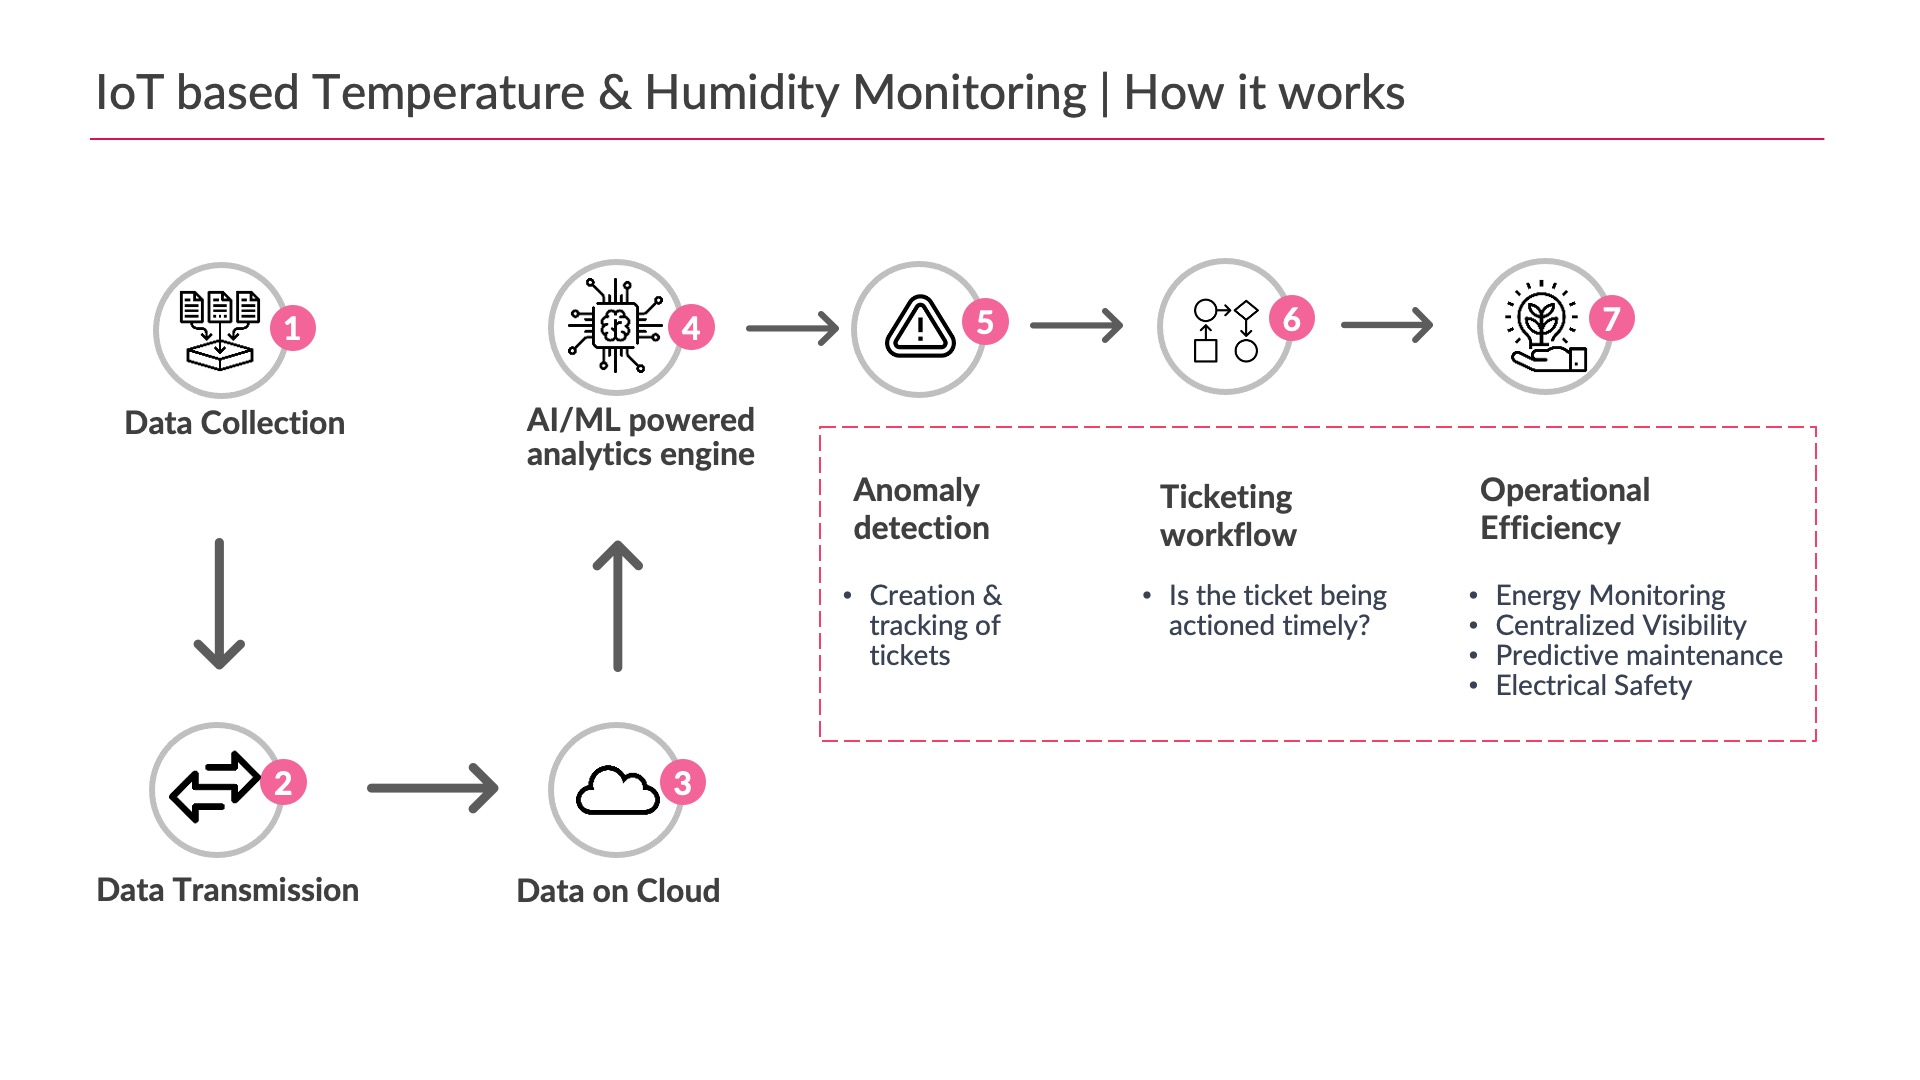 How do IoT-based temperature & humidity monitoring in data centers work?